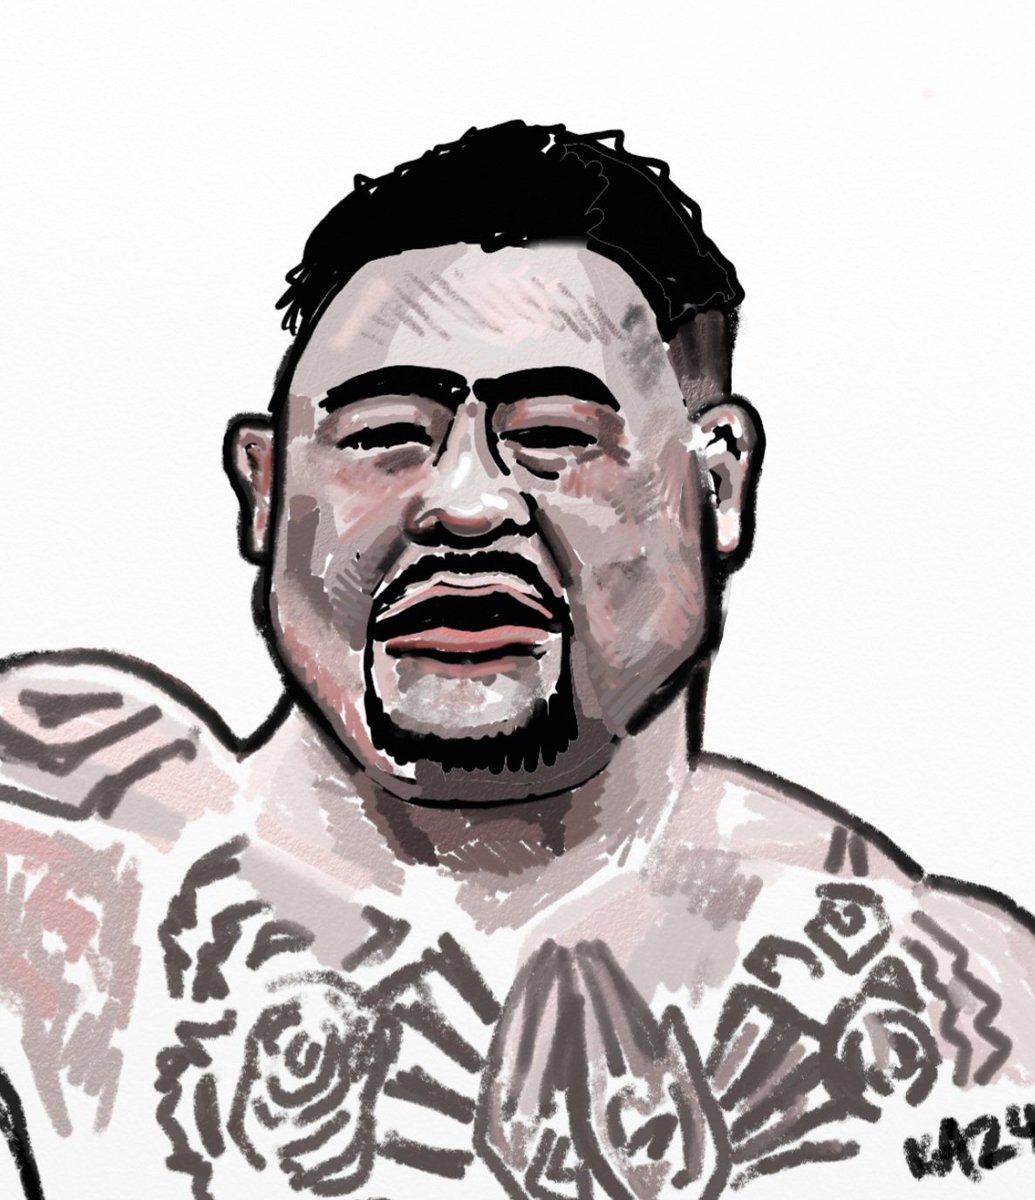 So excited about the new heavyweight action! @Andy_destroyer1 #andyruiz #andydestroyer #heavyweightboxing #boxing #boxingdoodles #fanart #artrage #ArtistOnTwitter